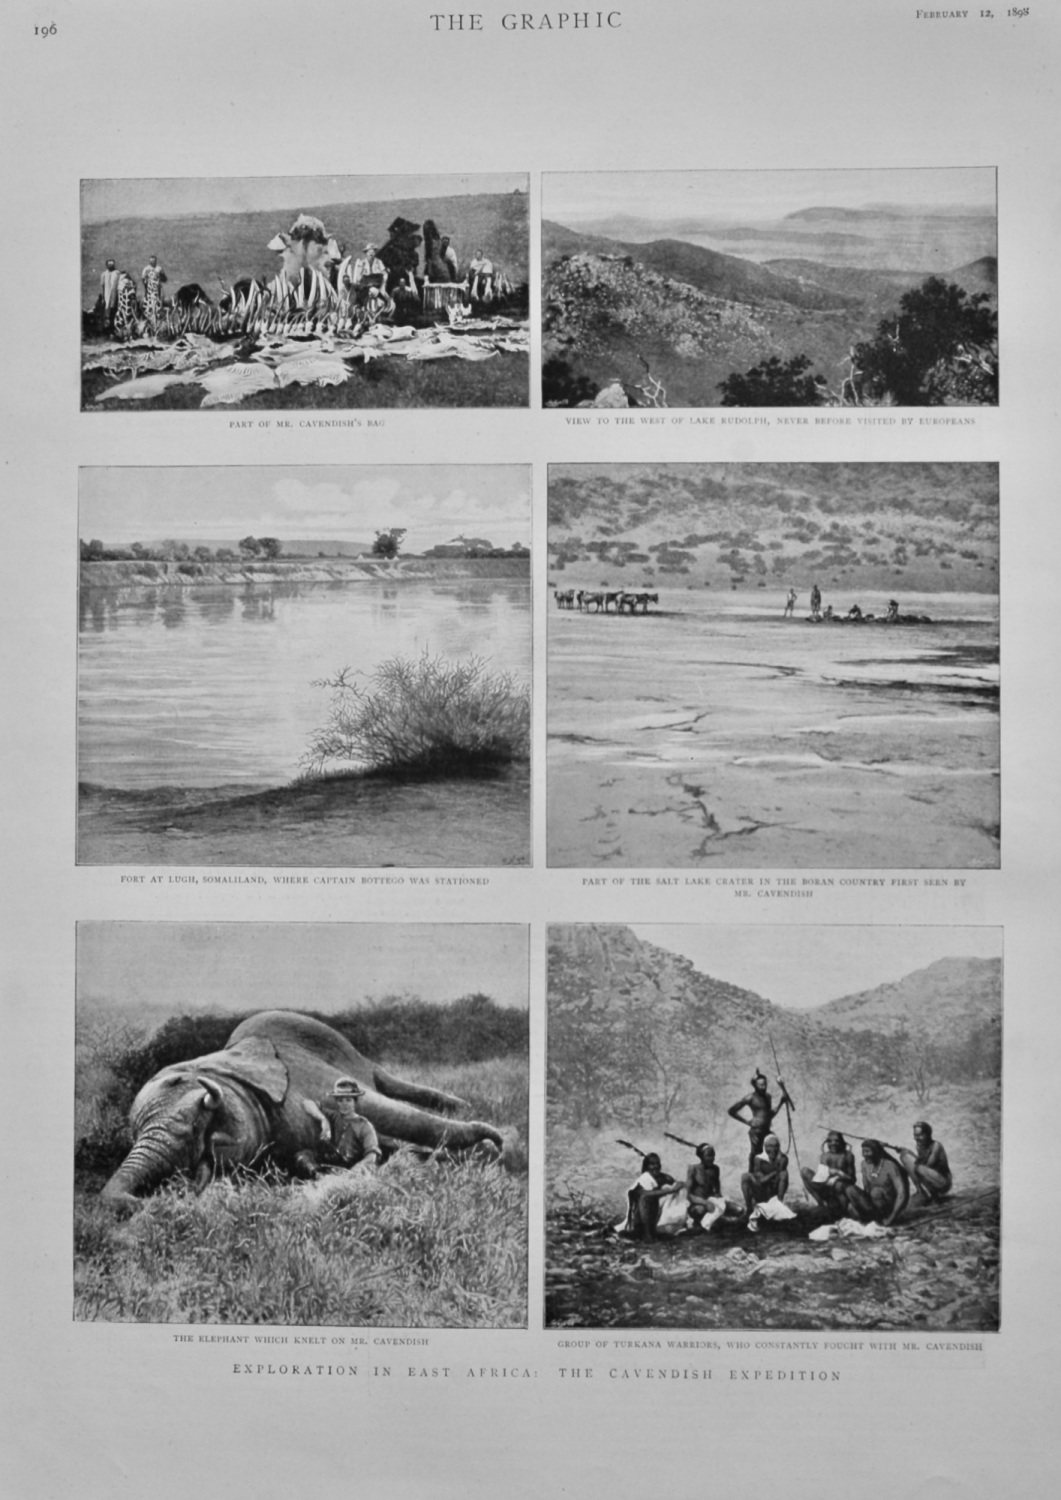 Exploration in East Africa : The Cavendish Expedition.  1898.